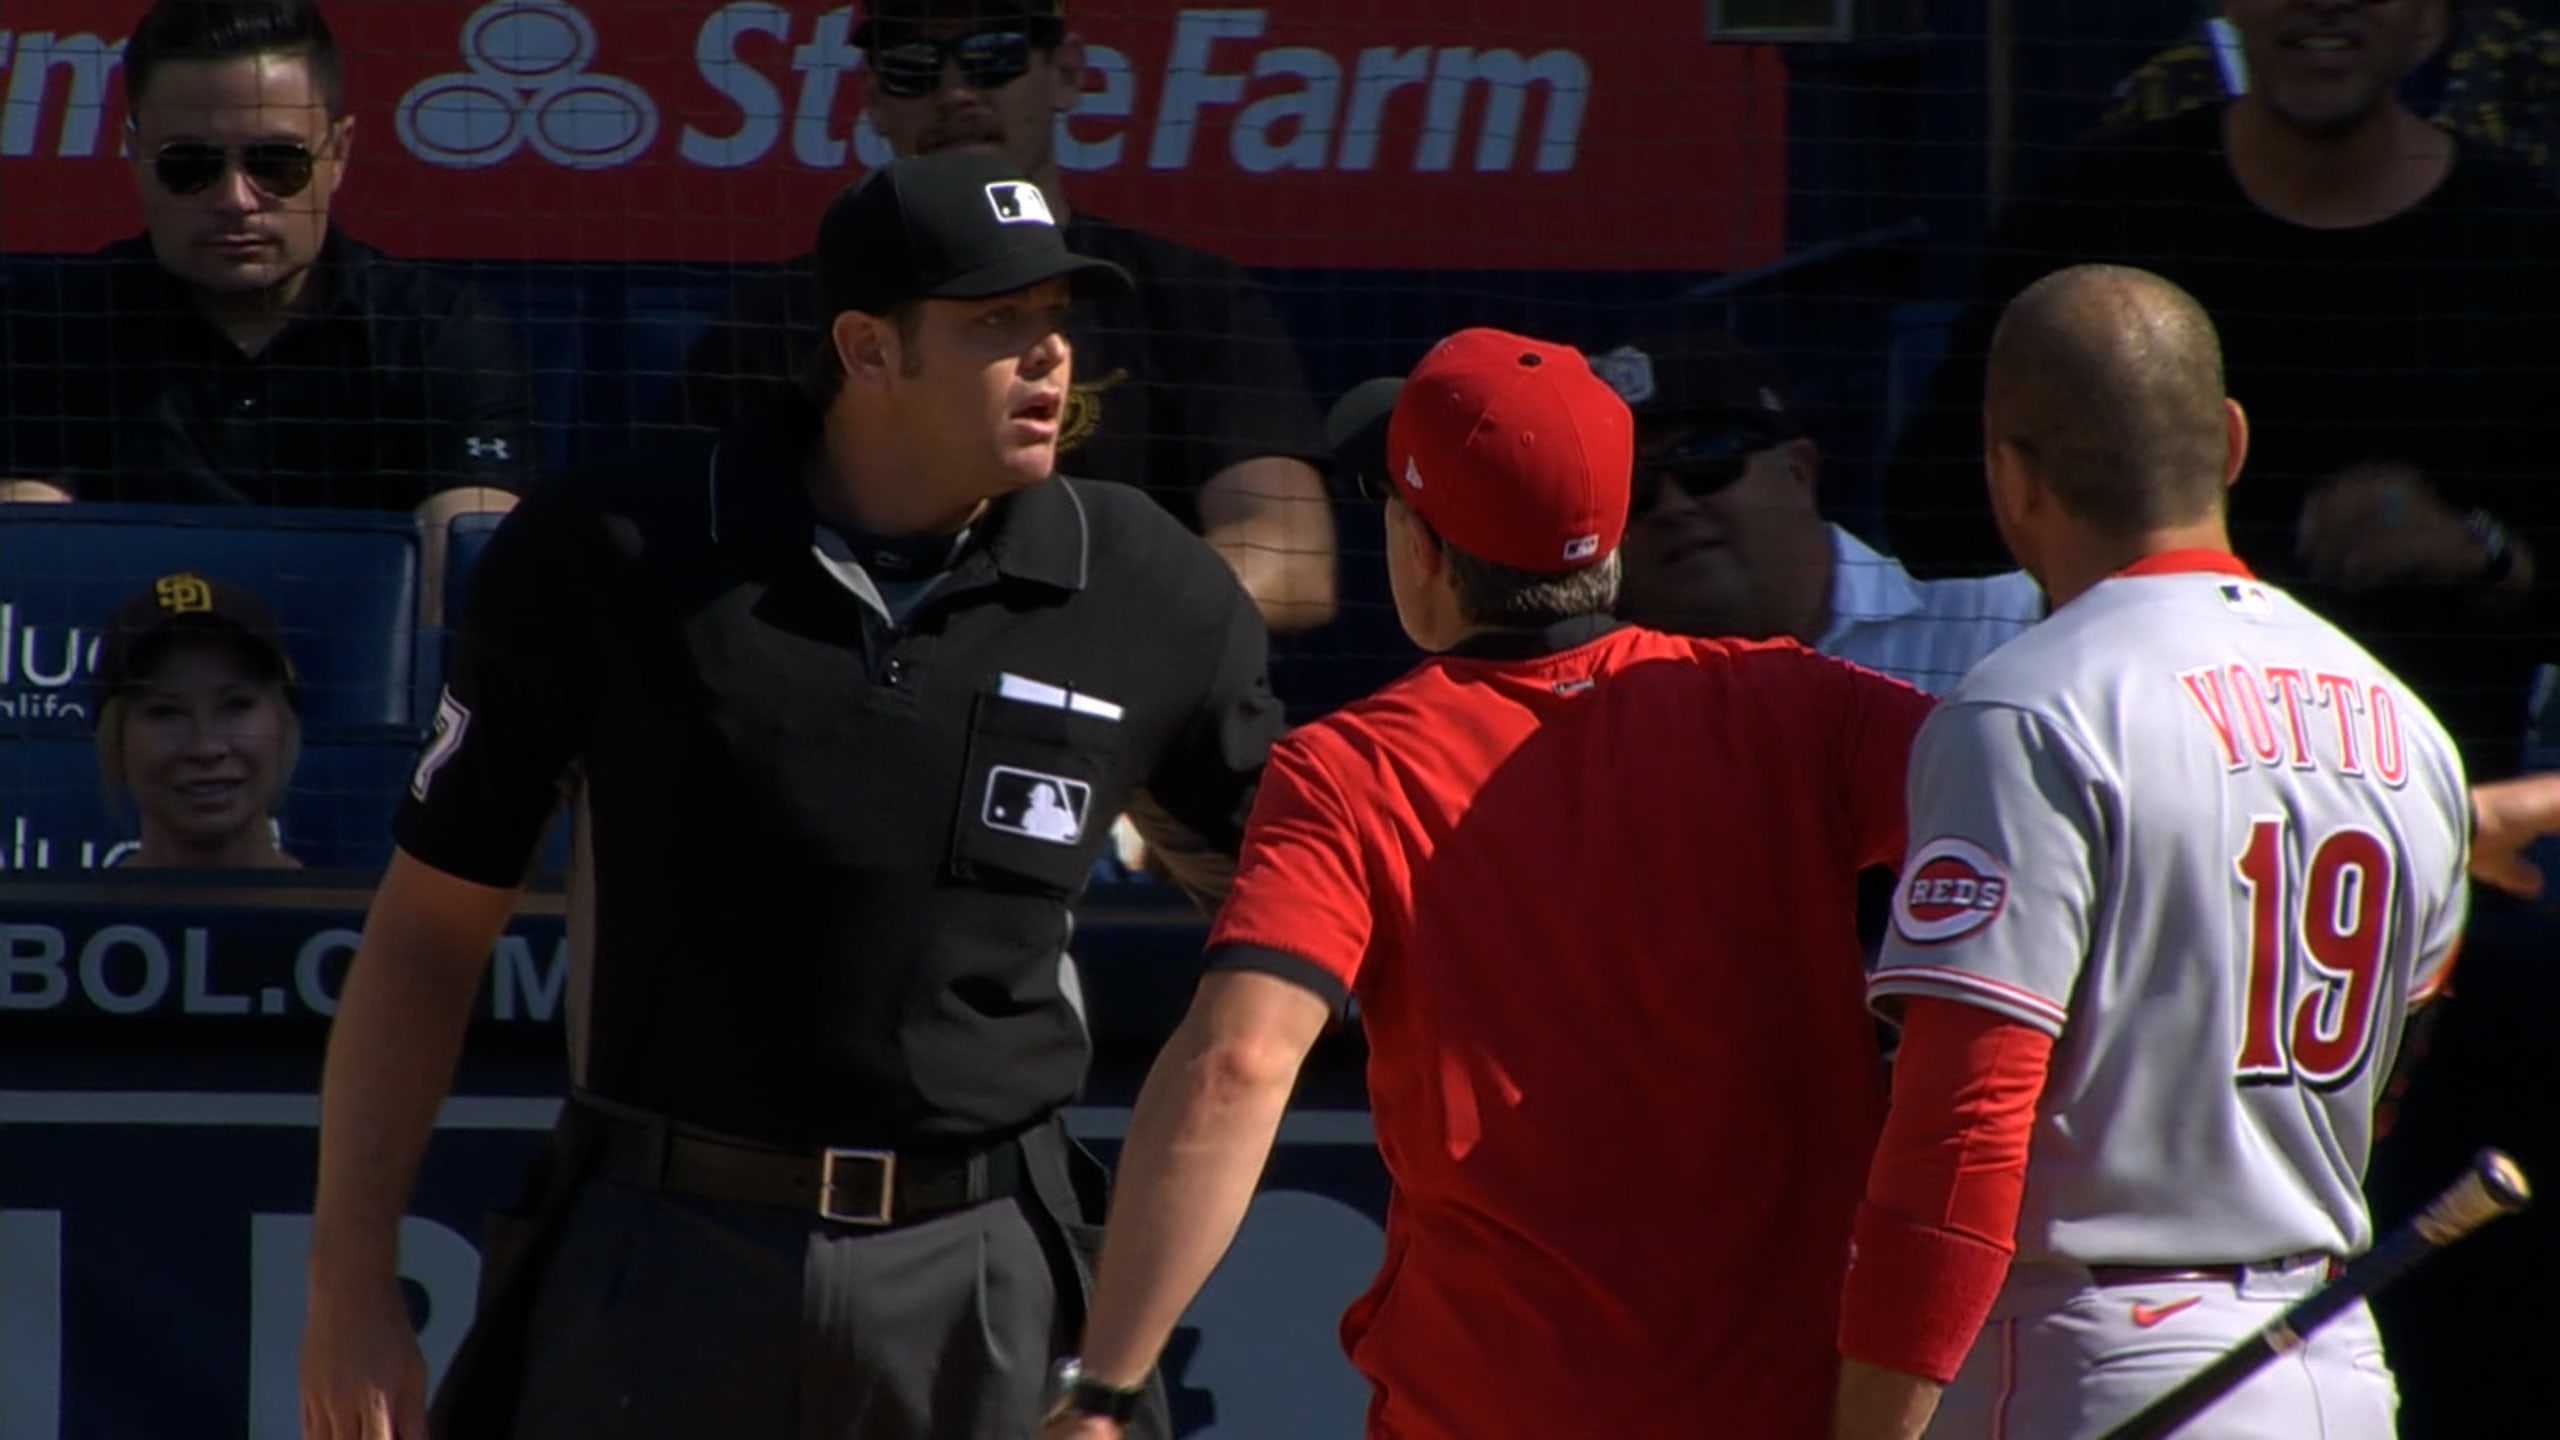 Right before hitting a grand slam, Joey Votto attempted to shoo a bird away  that was interrupting the game